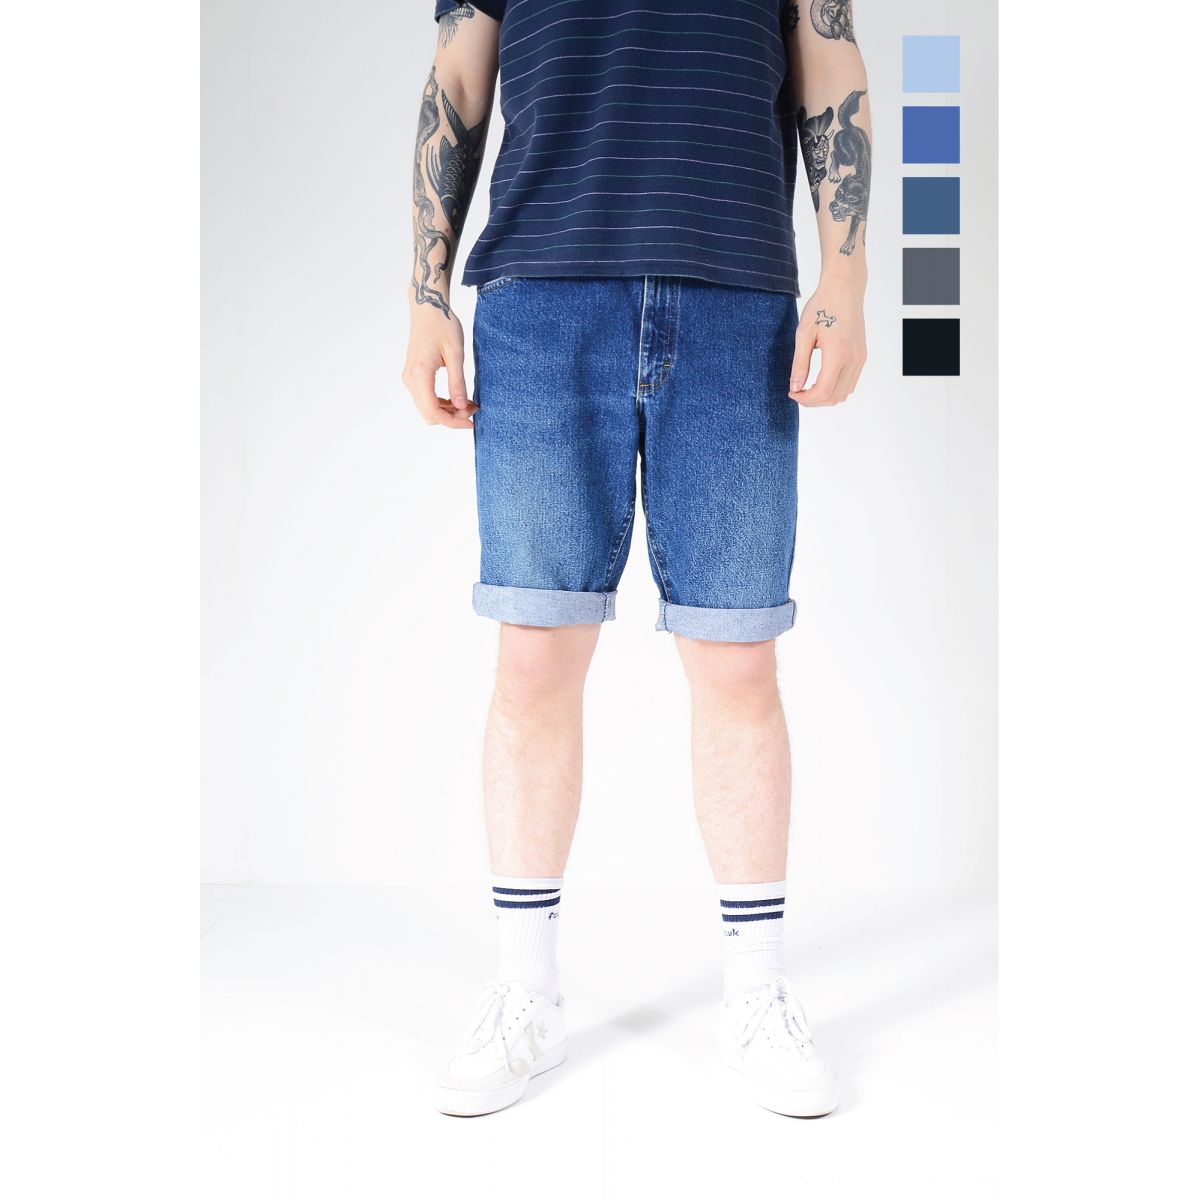 Summer Bodybuilding Mens Ripped Denim Shorts With Ripped Detailing And  Pocket For Men Fashionable And Casual Pants For Sports And Fashion Style  230713 From Ning02, $46.77 | DHgate.Com